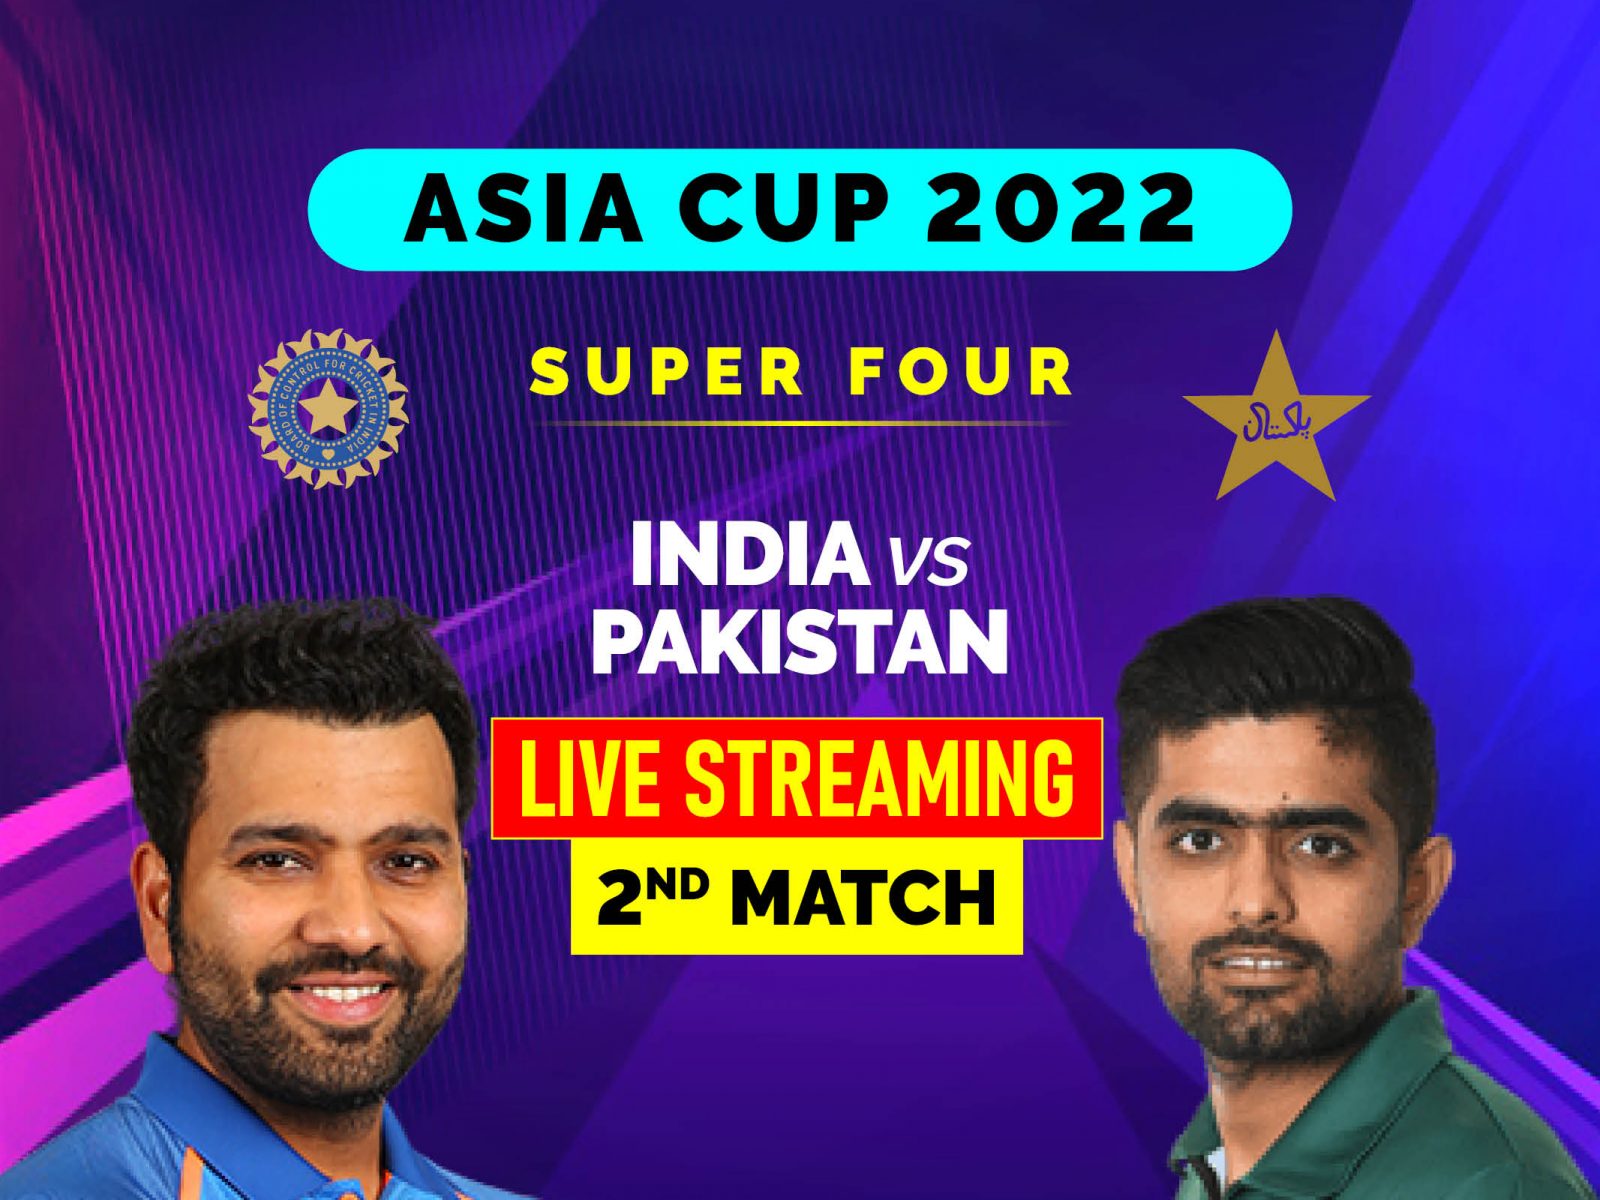 India vs Pakistan Live Cricket Streaming Asia Cup 2022 Super 4 IND vs PAK When and Where to Watch the IND vs PAK Asia Cup 2022 match